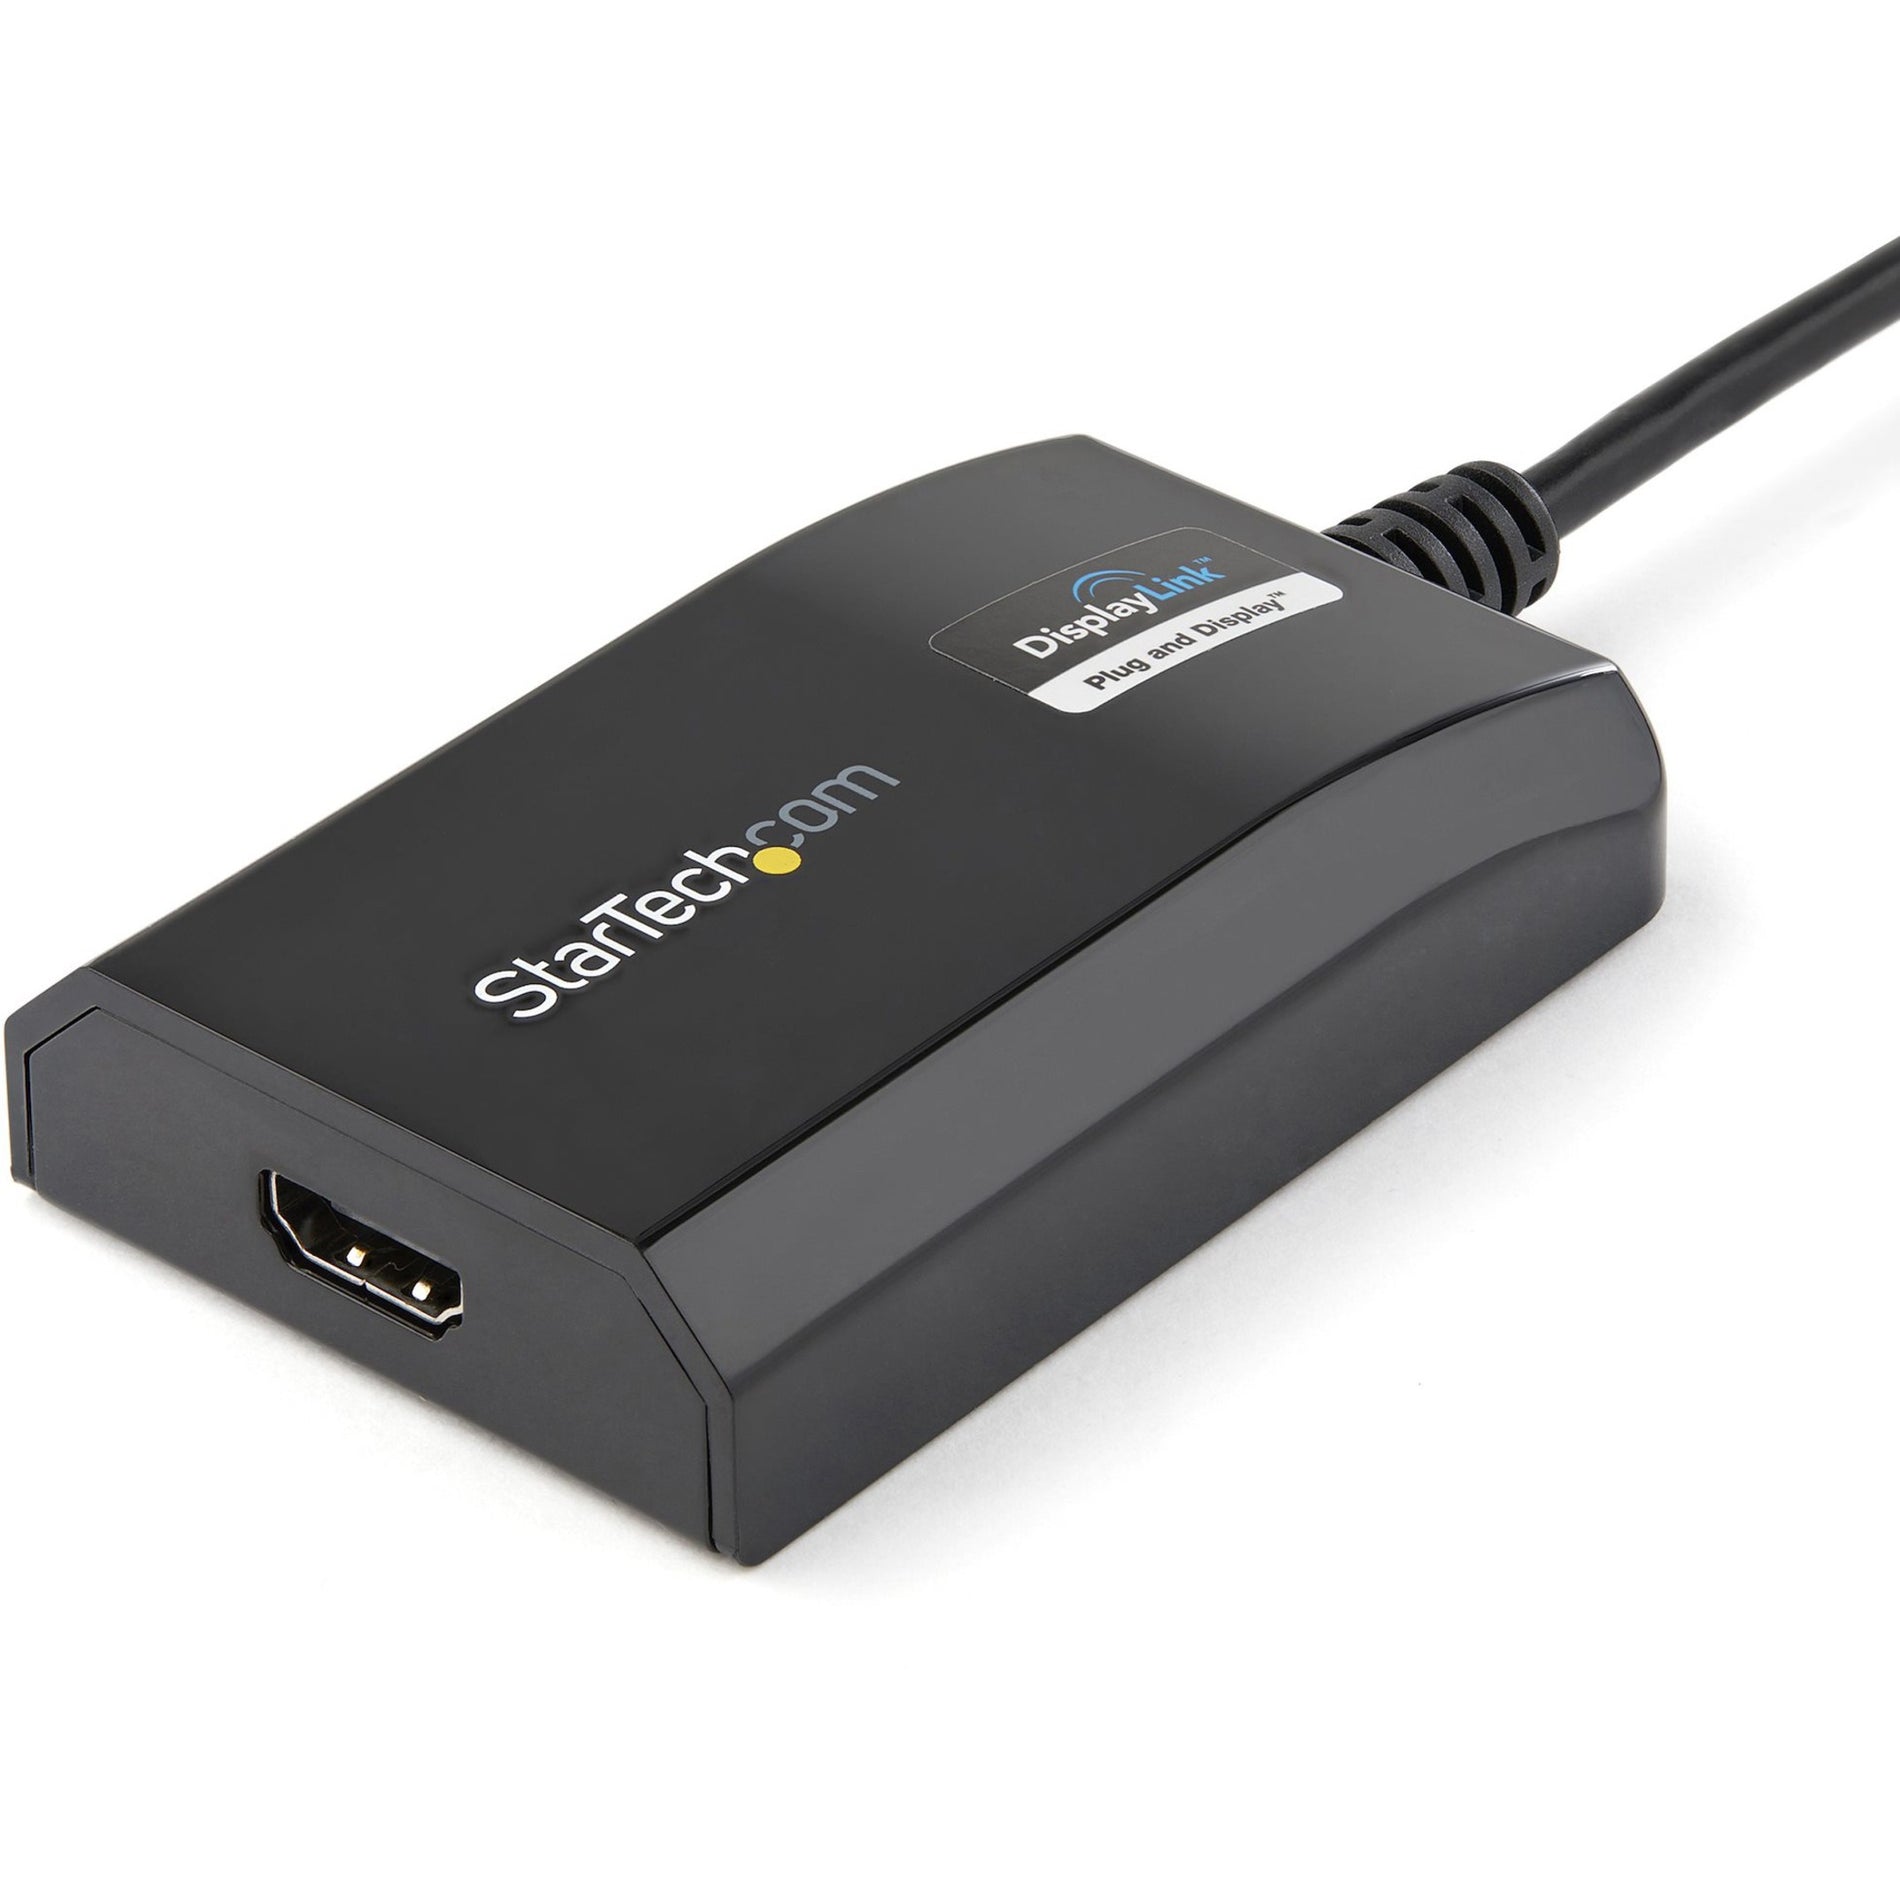 StarTech.com USB32HDPRO USB 3.0 to HDMI Video Adapter for Mac & PC, Enhance Your Display with Ease